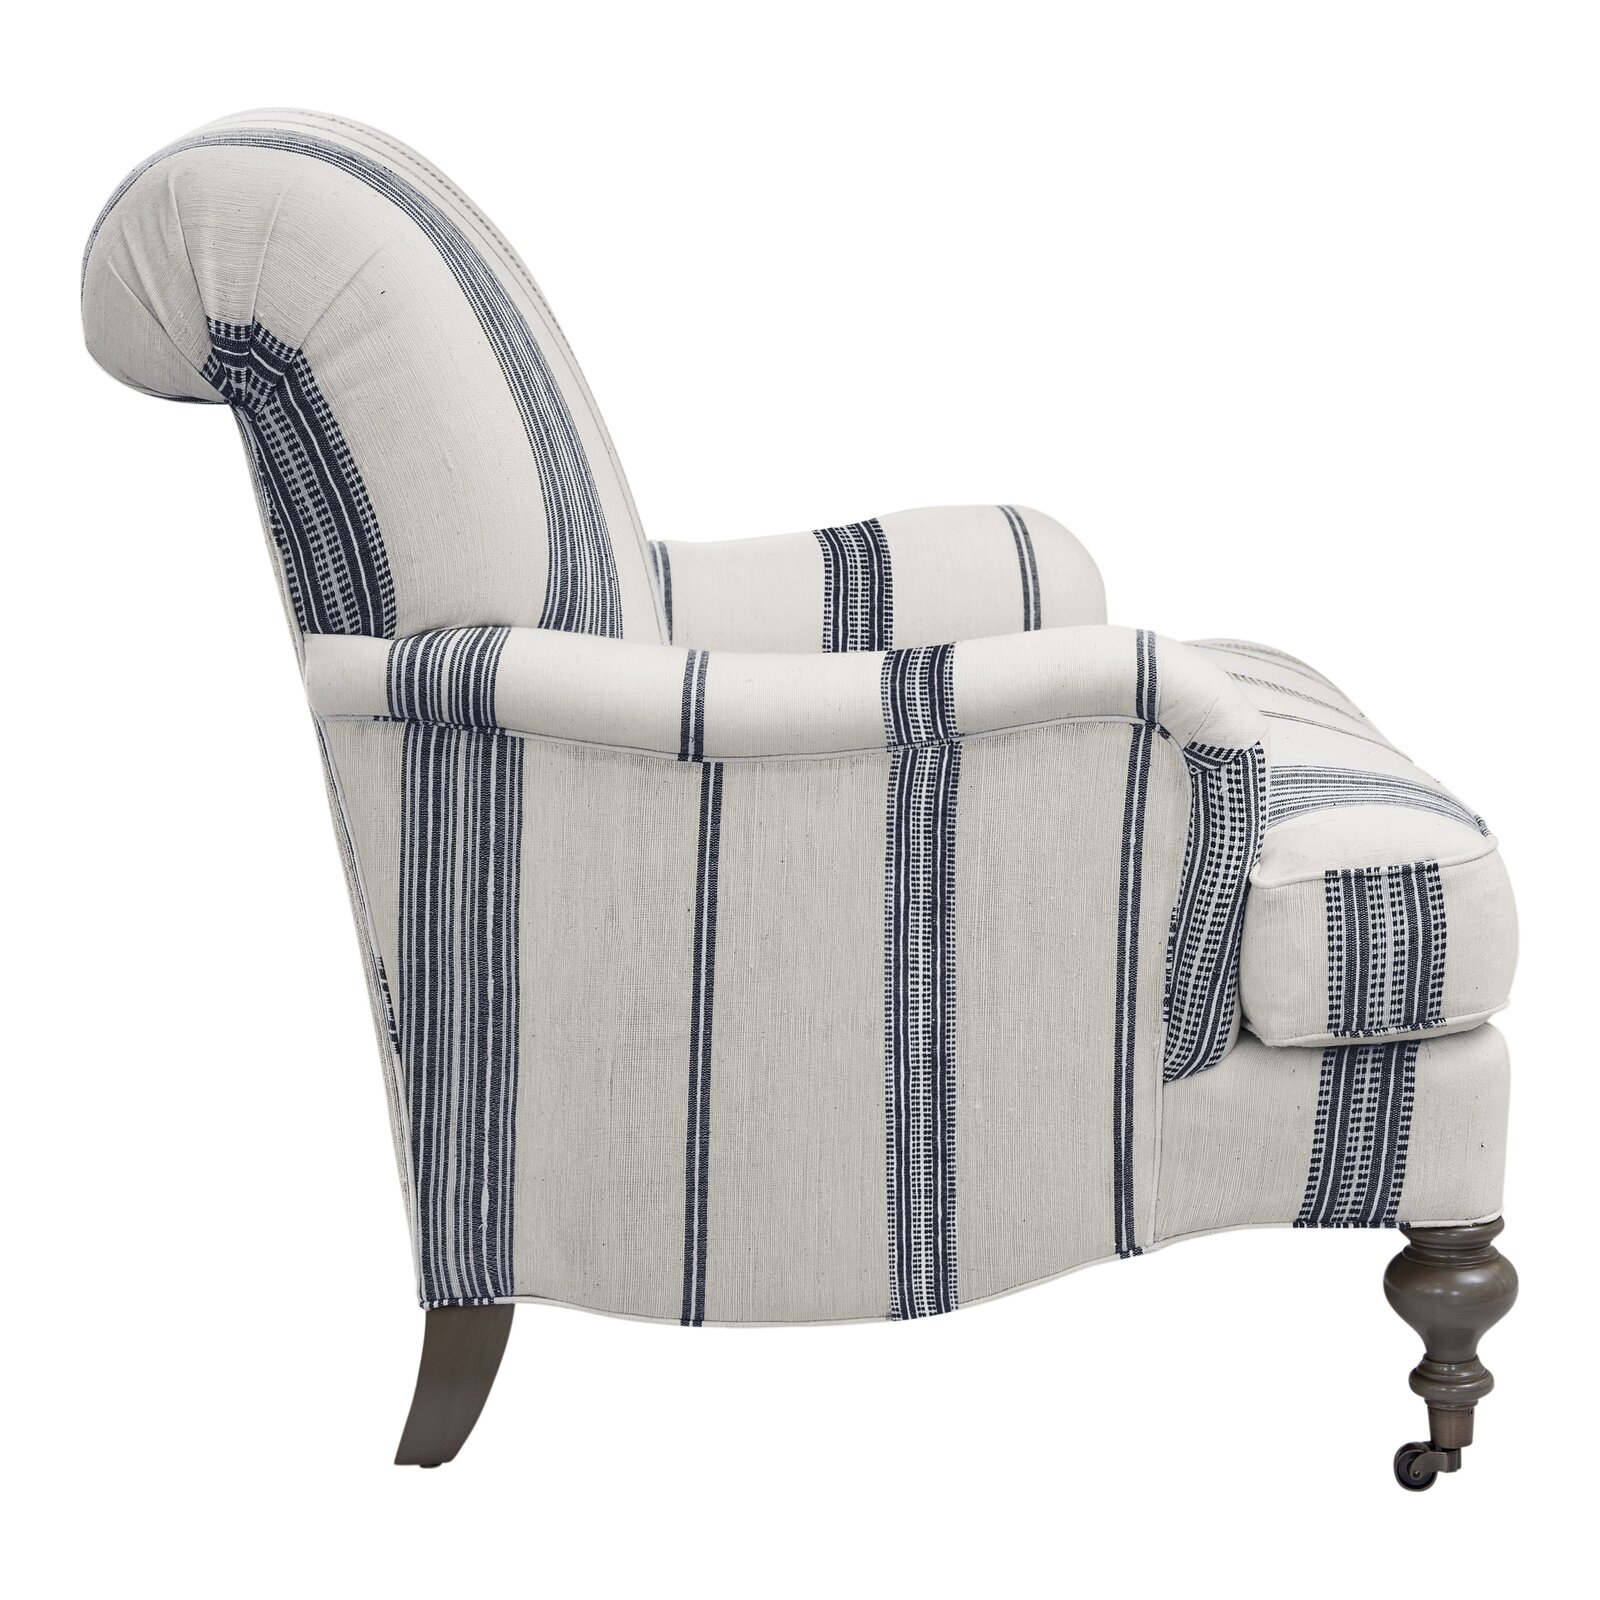 Imagine Home Chatsworth 33" W Cotton Armchair Fabric: Natural/Navy Stripe - Image 2